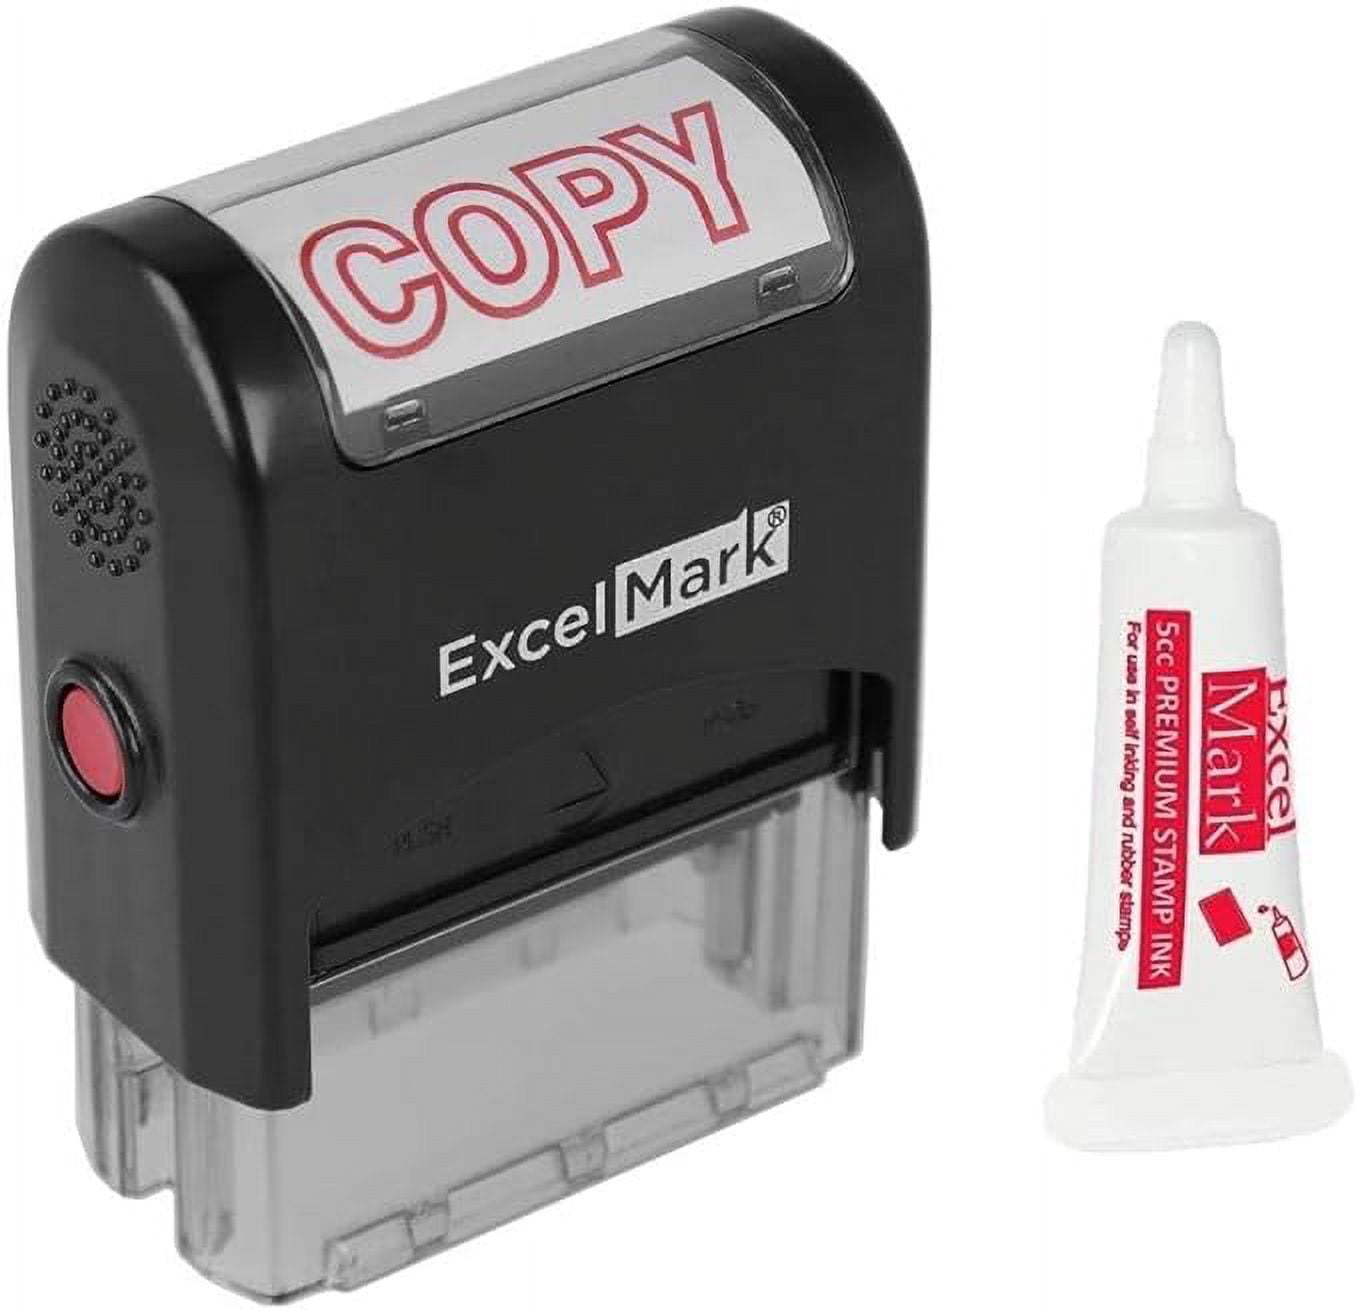 ExcelMark Black Ink Pad for Rubber Stamps 2-1/8 by 3-1/4